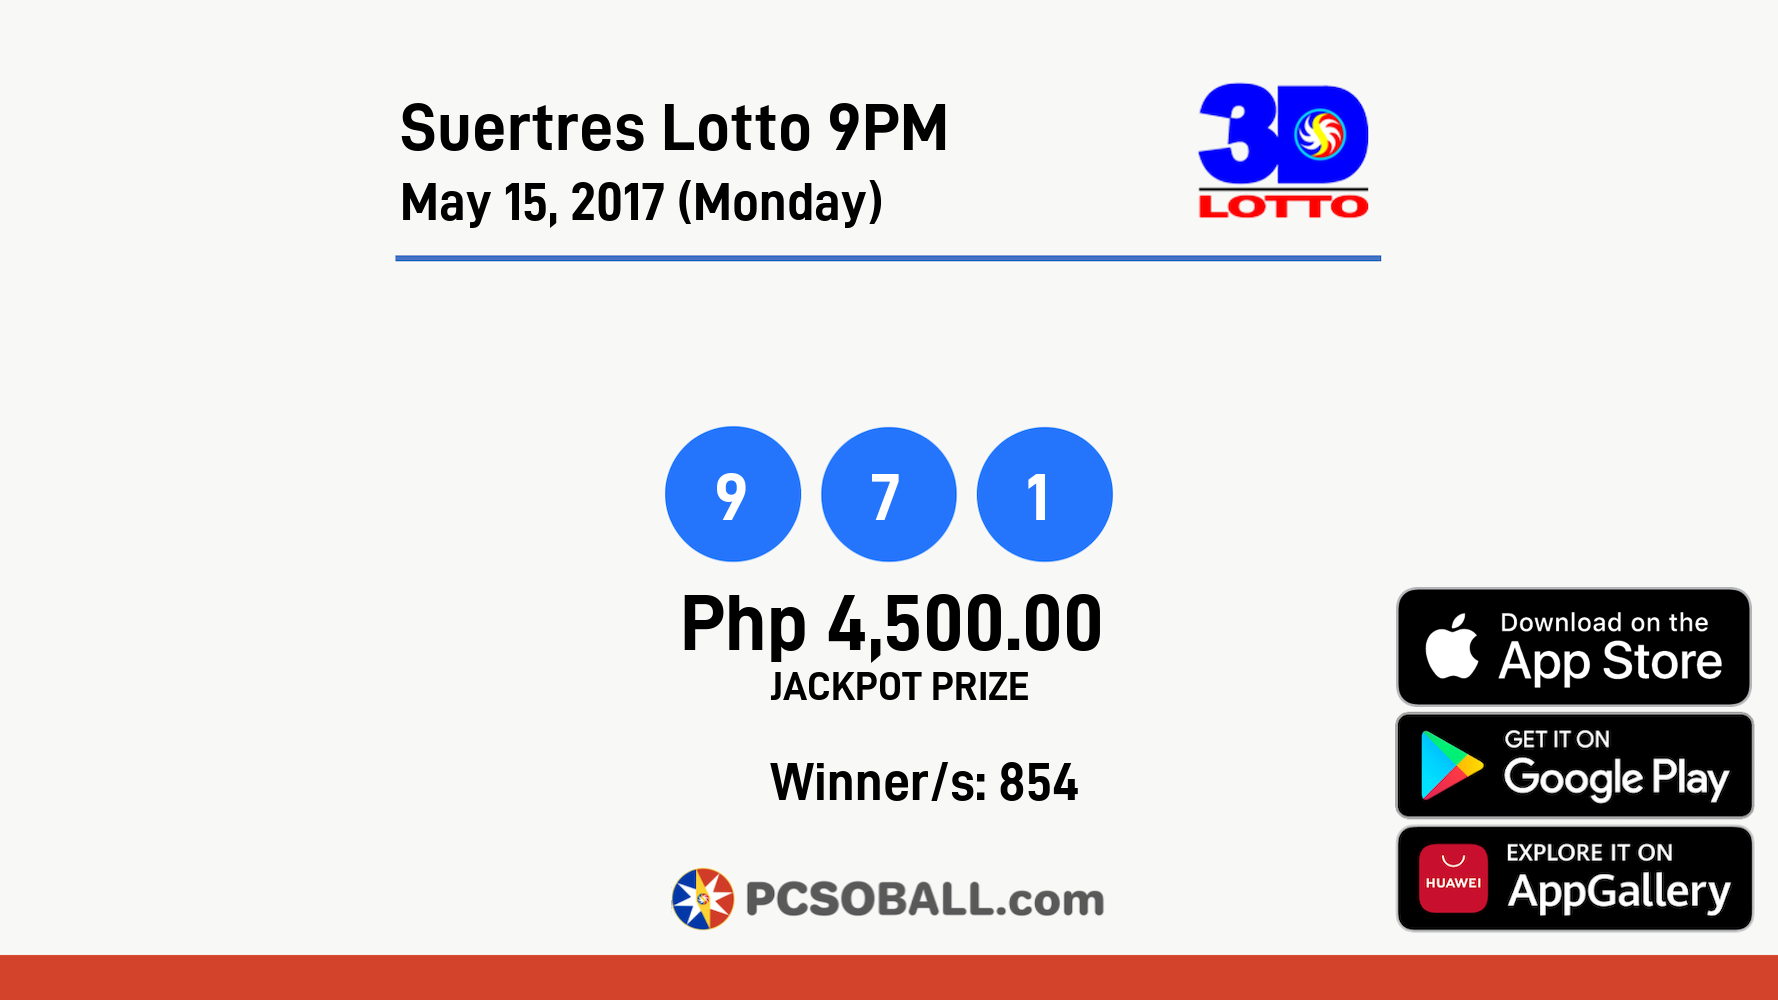 Suertres Lotto 9PM May 15, 2017 (Monday) Result